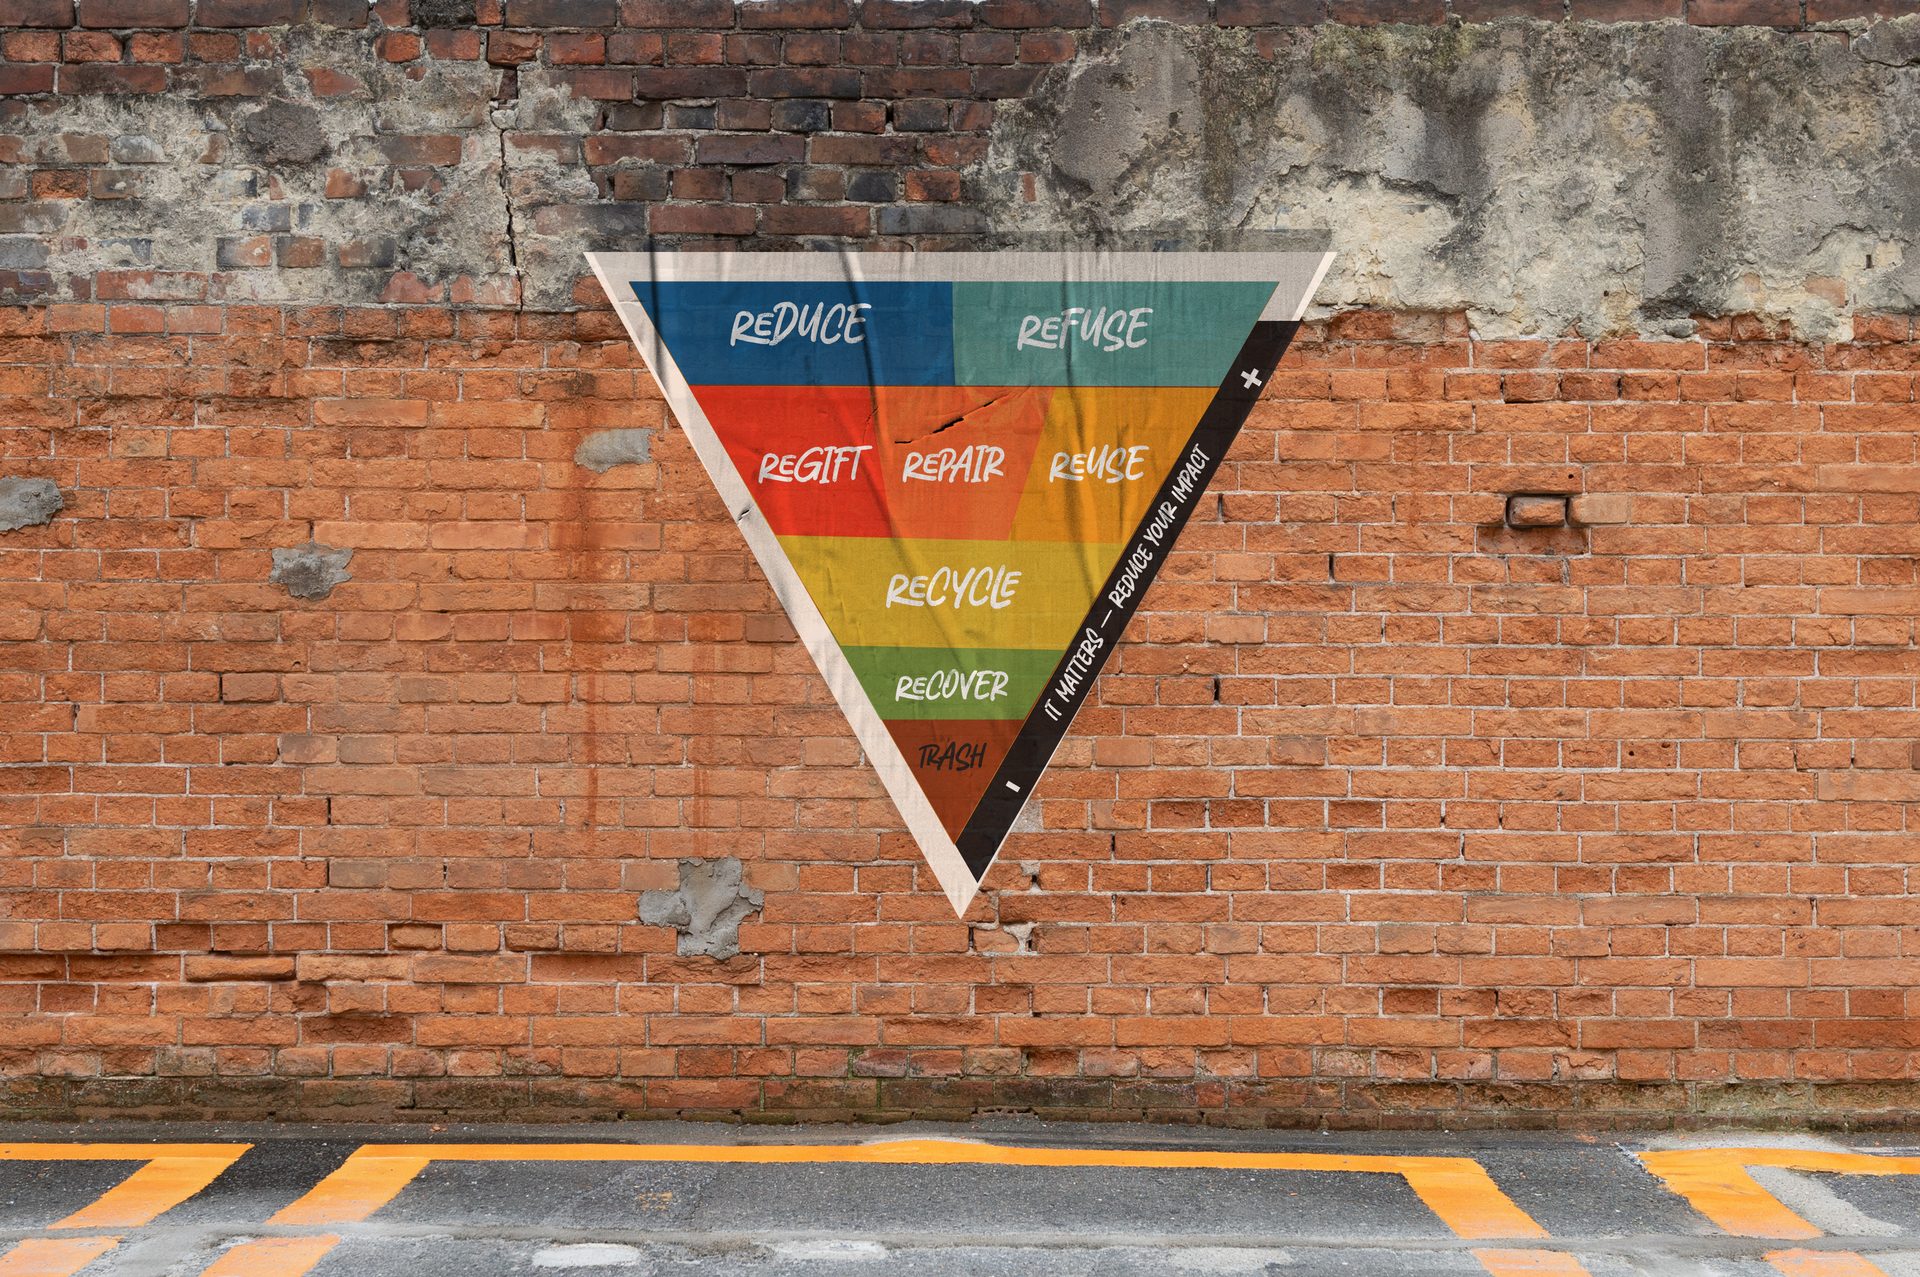 Road surface, Building material, Colorfulness, Rectangle, Brick, Orange, Triangle, Wood, Brickwork, Wall